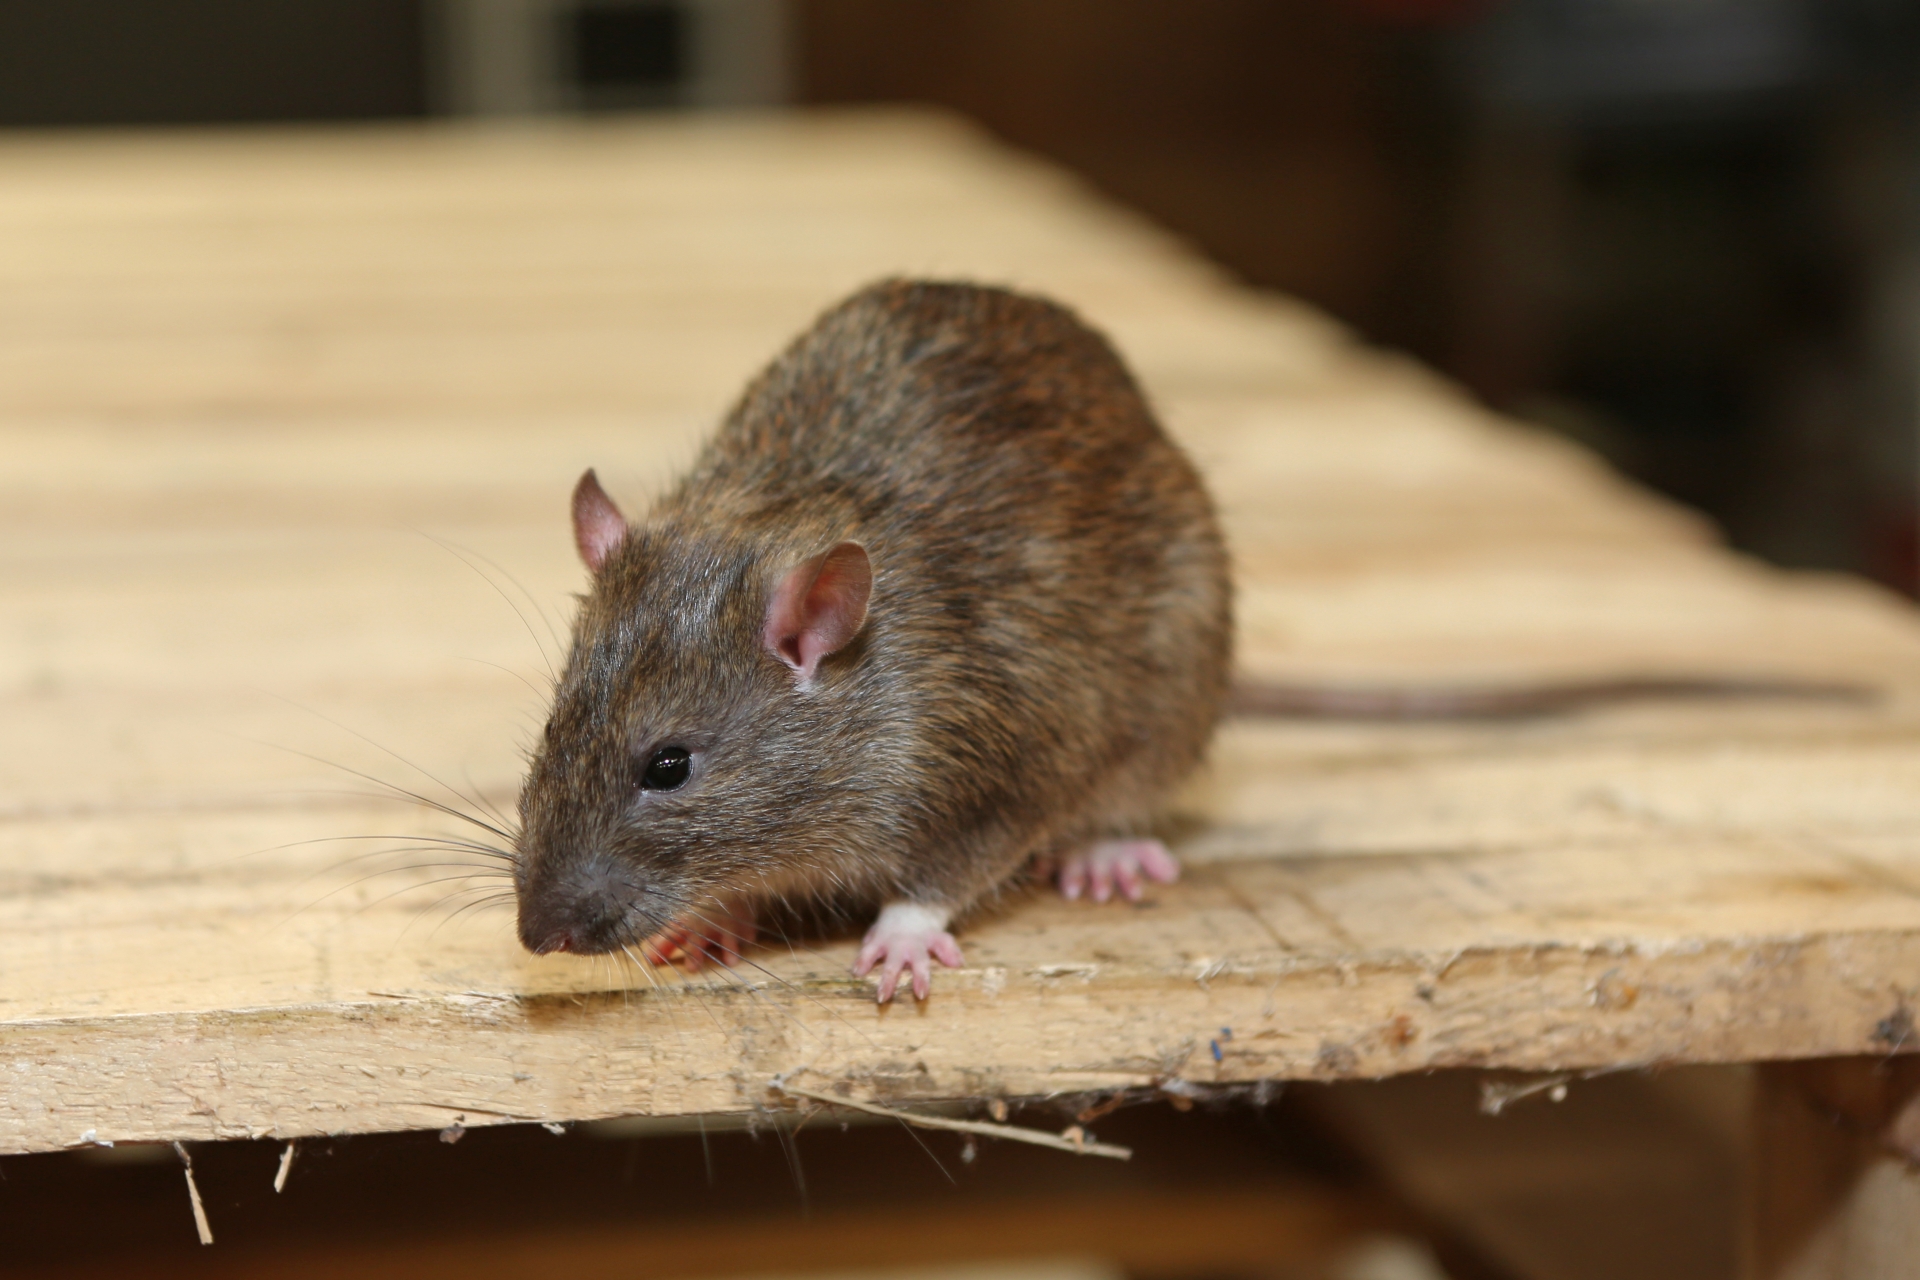 Rat Infestation, Pest Control in Parson's Green, SW6. Call Now 020 8166 9746